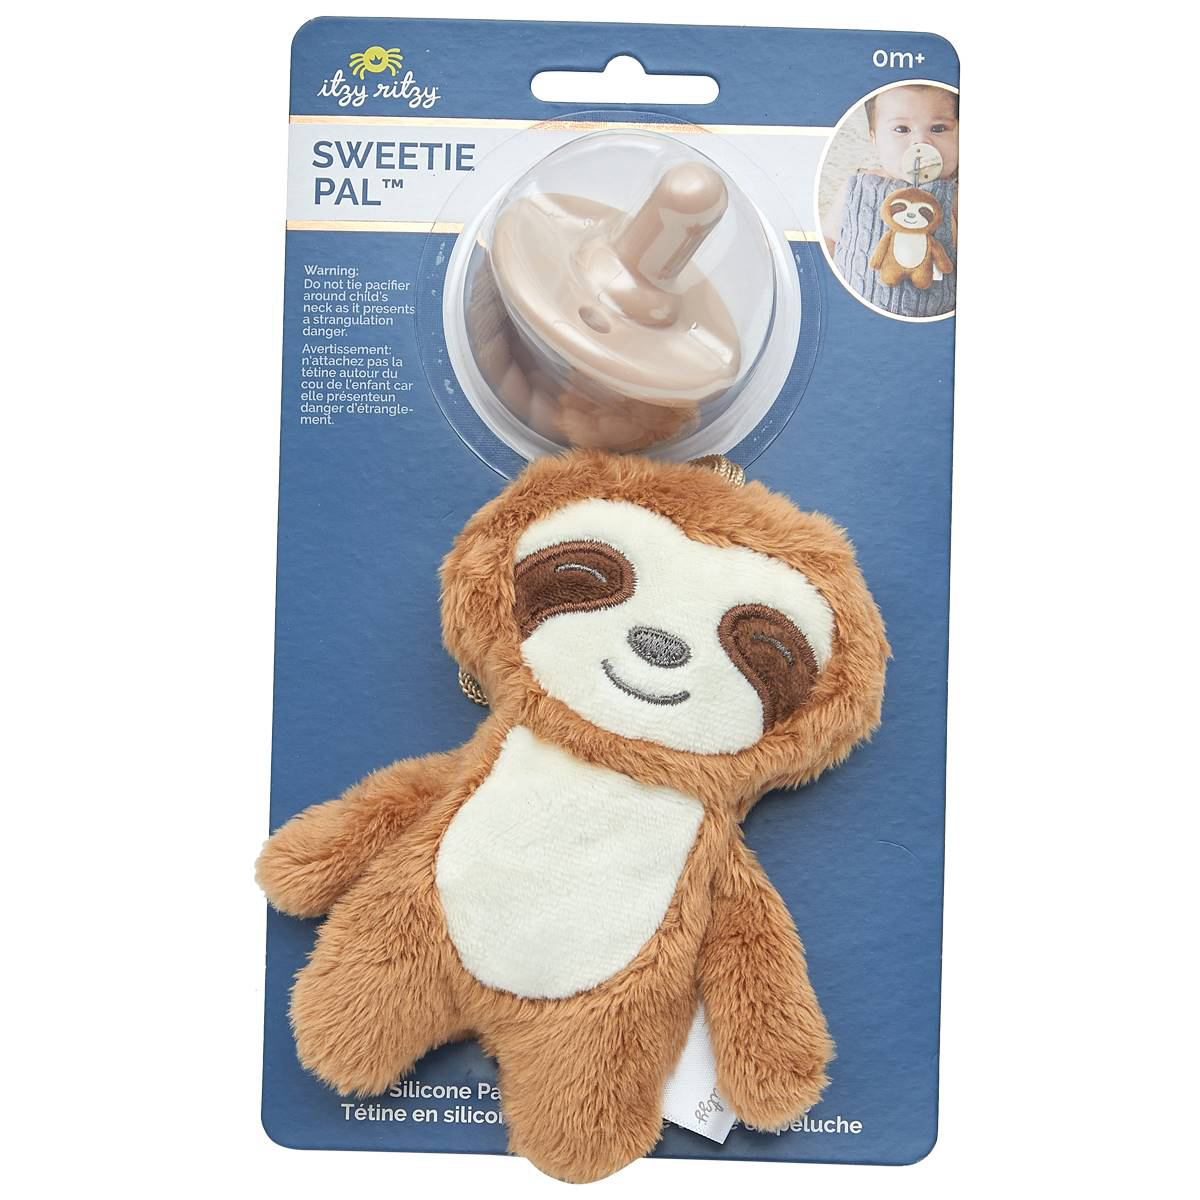 Baby Unisex Itzy Ritzy Sweetie Pal(tm) Sloth Pacifier Plush Set